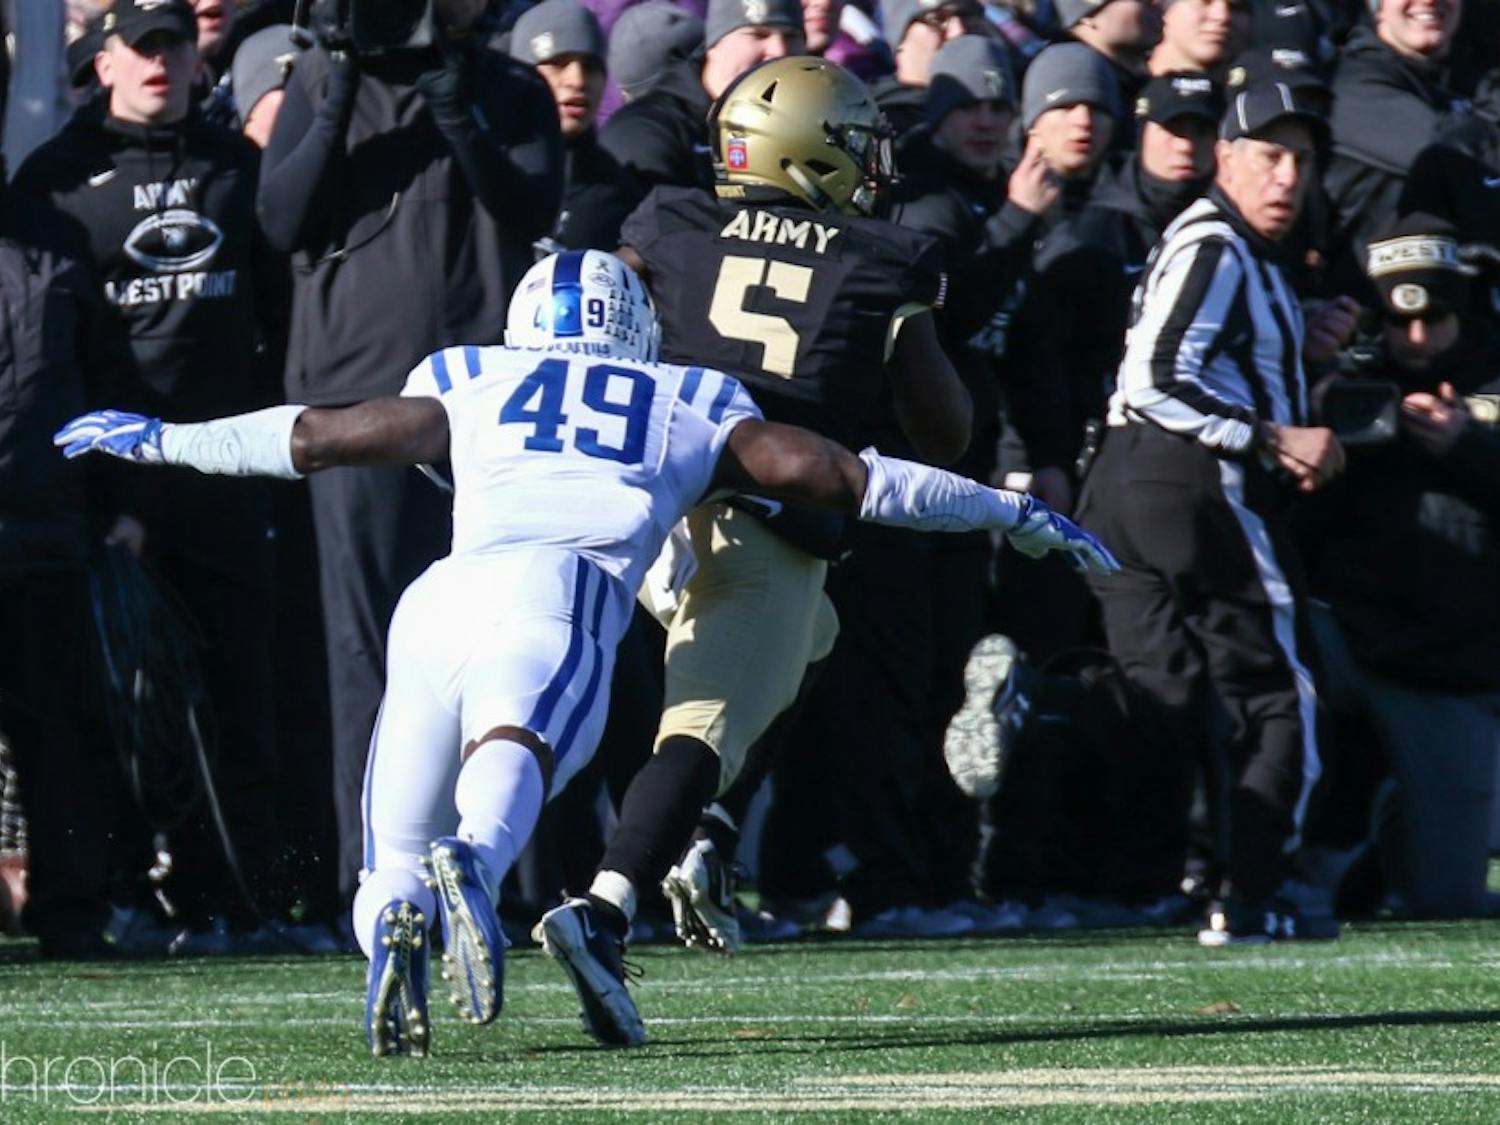 Duke's defense needs to stay focused and disciplined in order to stop Army's dominant triple option offense from running up the score.